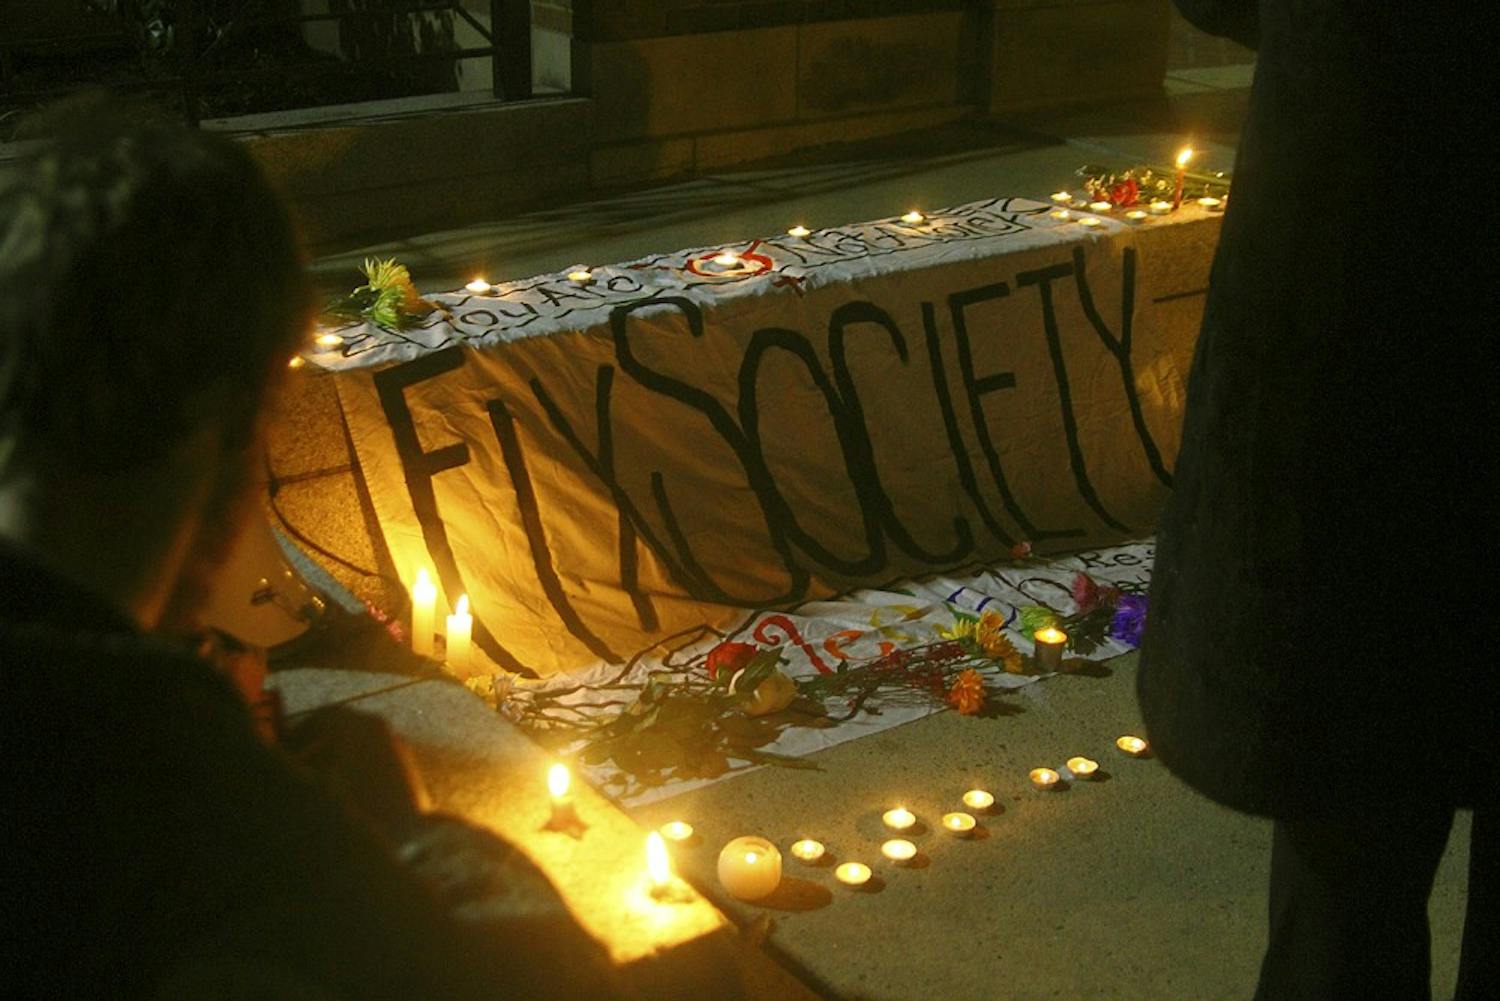 There was a vigil at Peace and Justice Plaza on Wednesday night, Jan. 28.